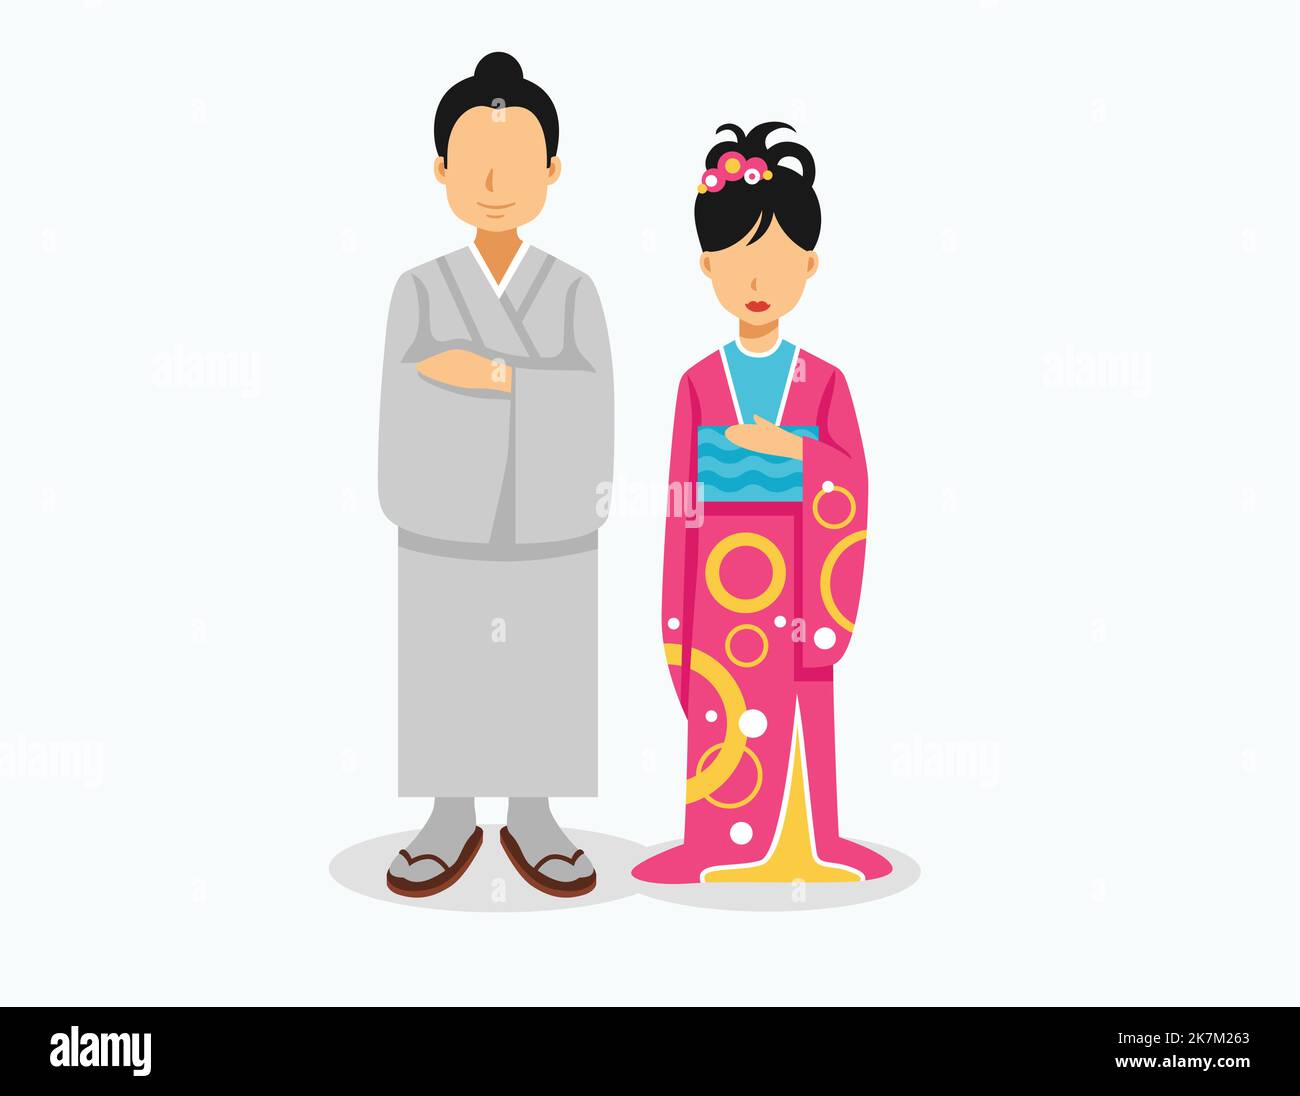 chines, japan couple wearing traditional outfit character illustration on white isolated background Stock Vector